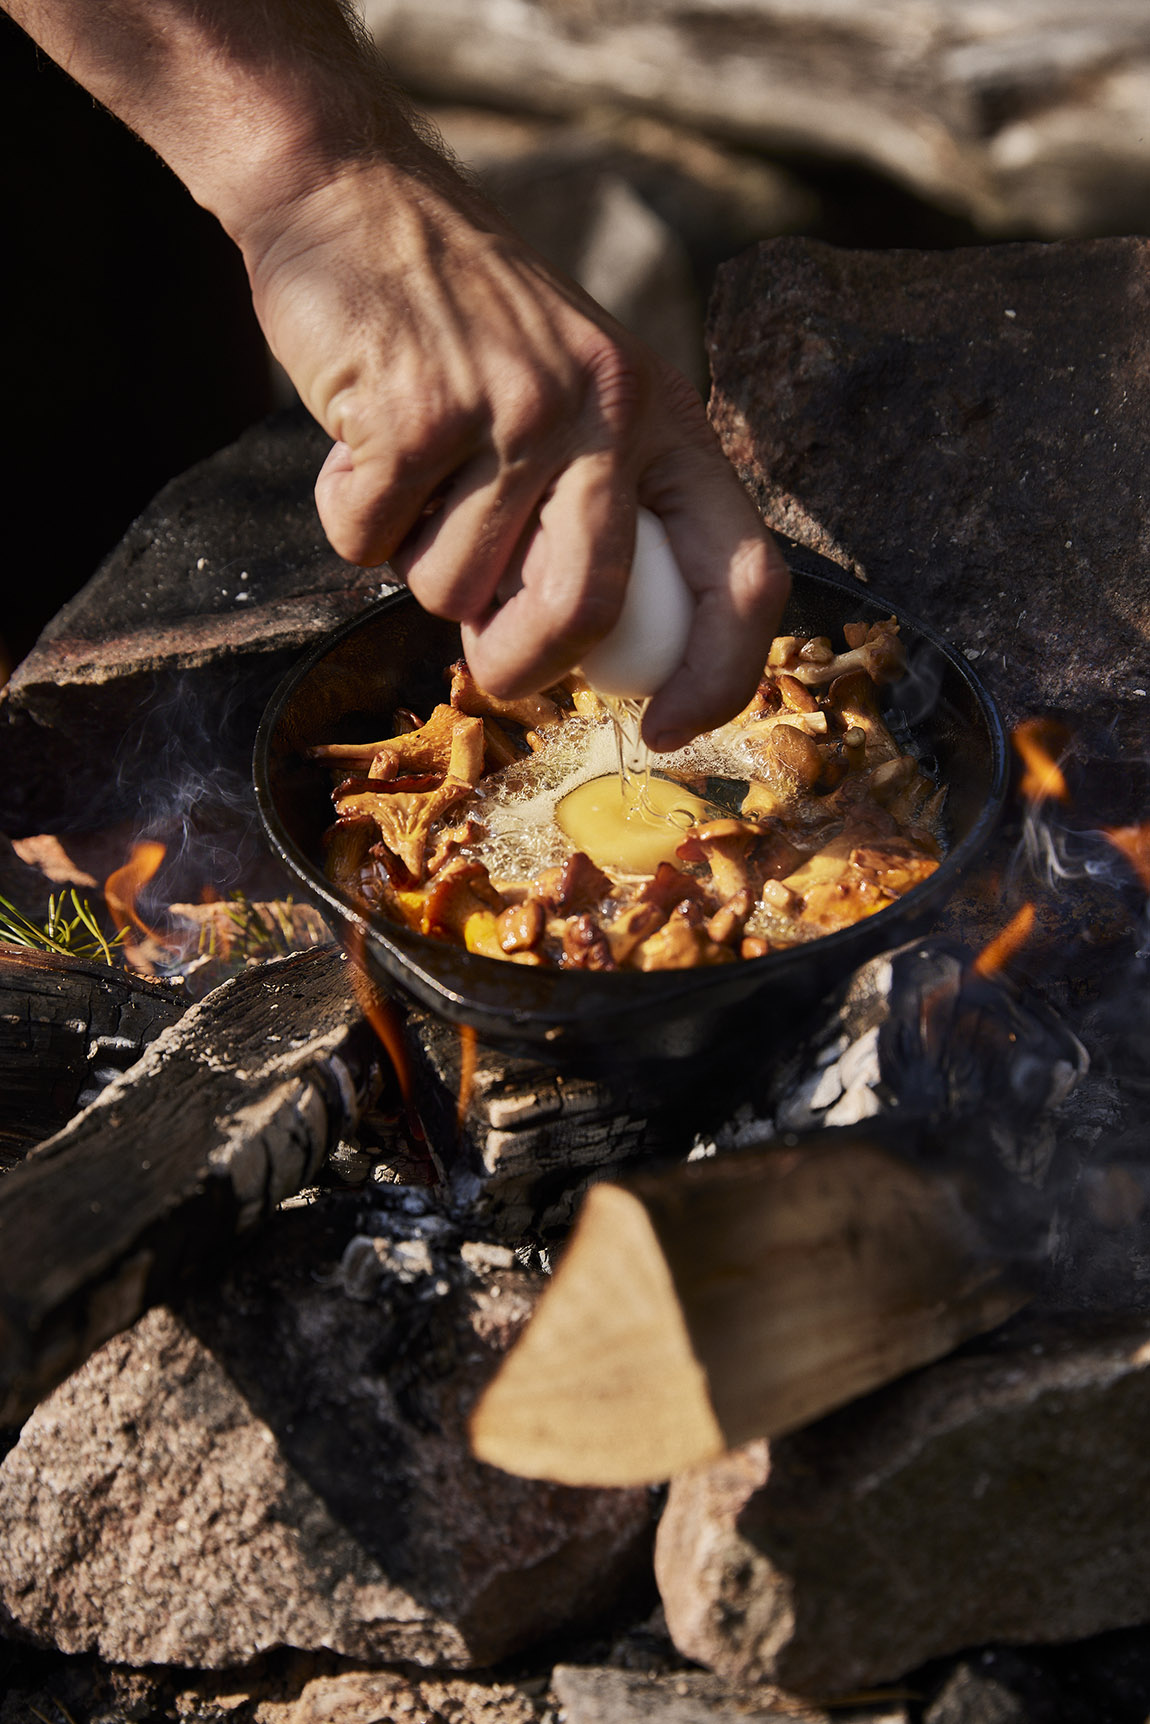 Niklas Ekstedt, Sweden’s favourite chef, on cooking over an open fire